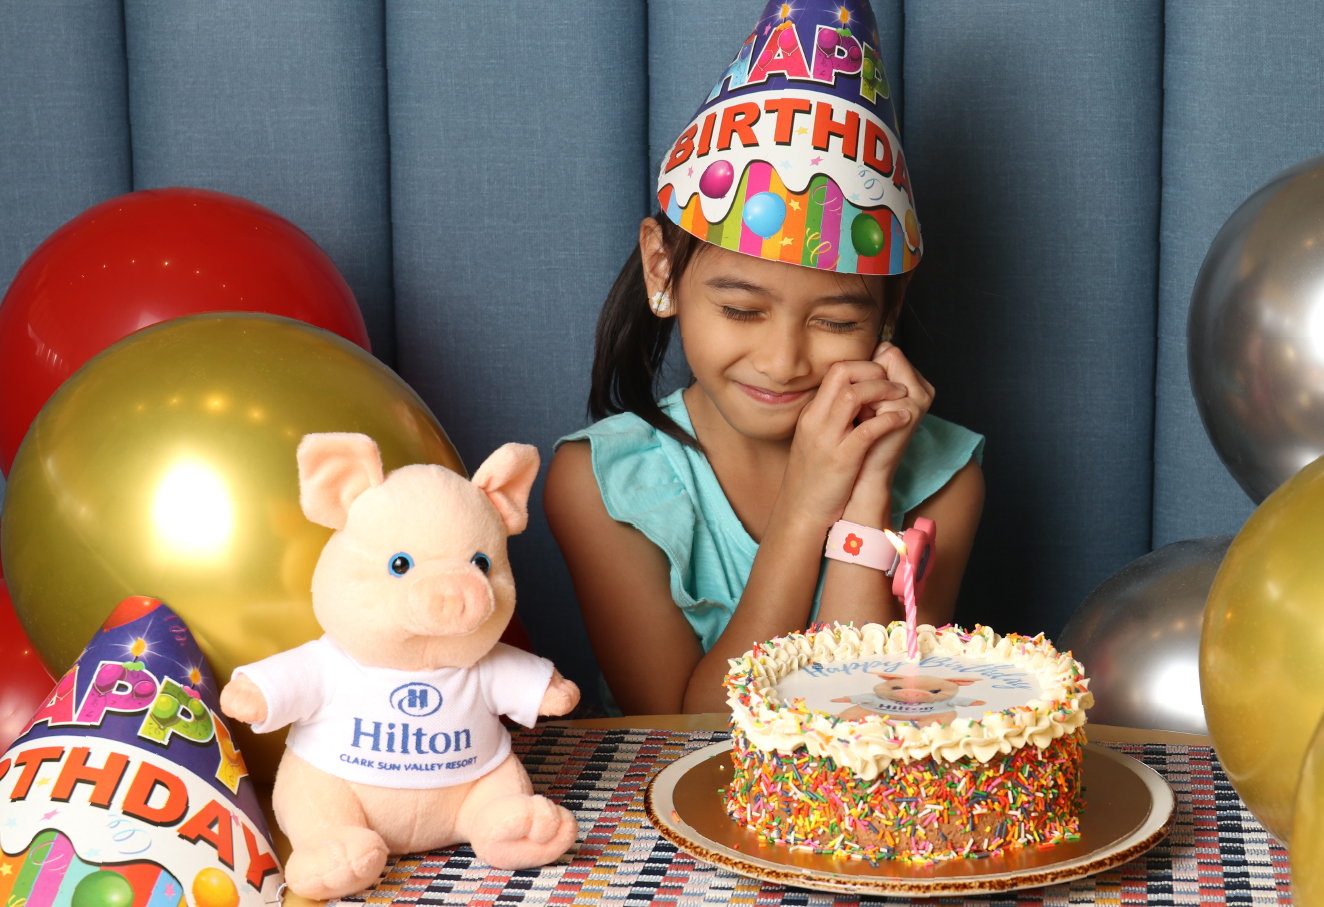 A girl celebrating her birthday. She is wearing a birthday hat and making a wish. The table has a birthday cake with one candle, a piglet plushie, and a few balloons.